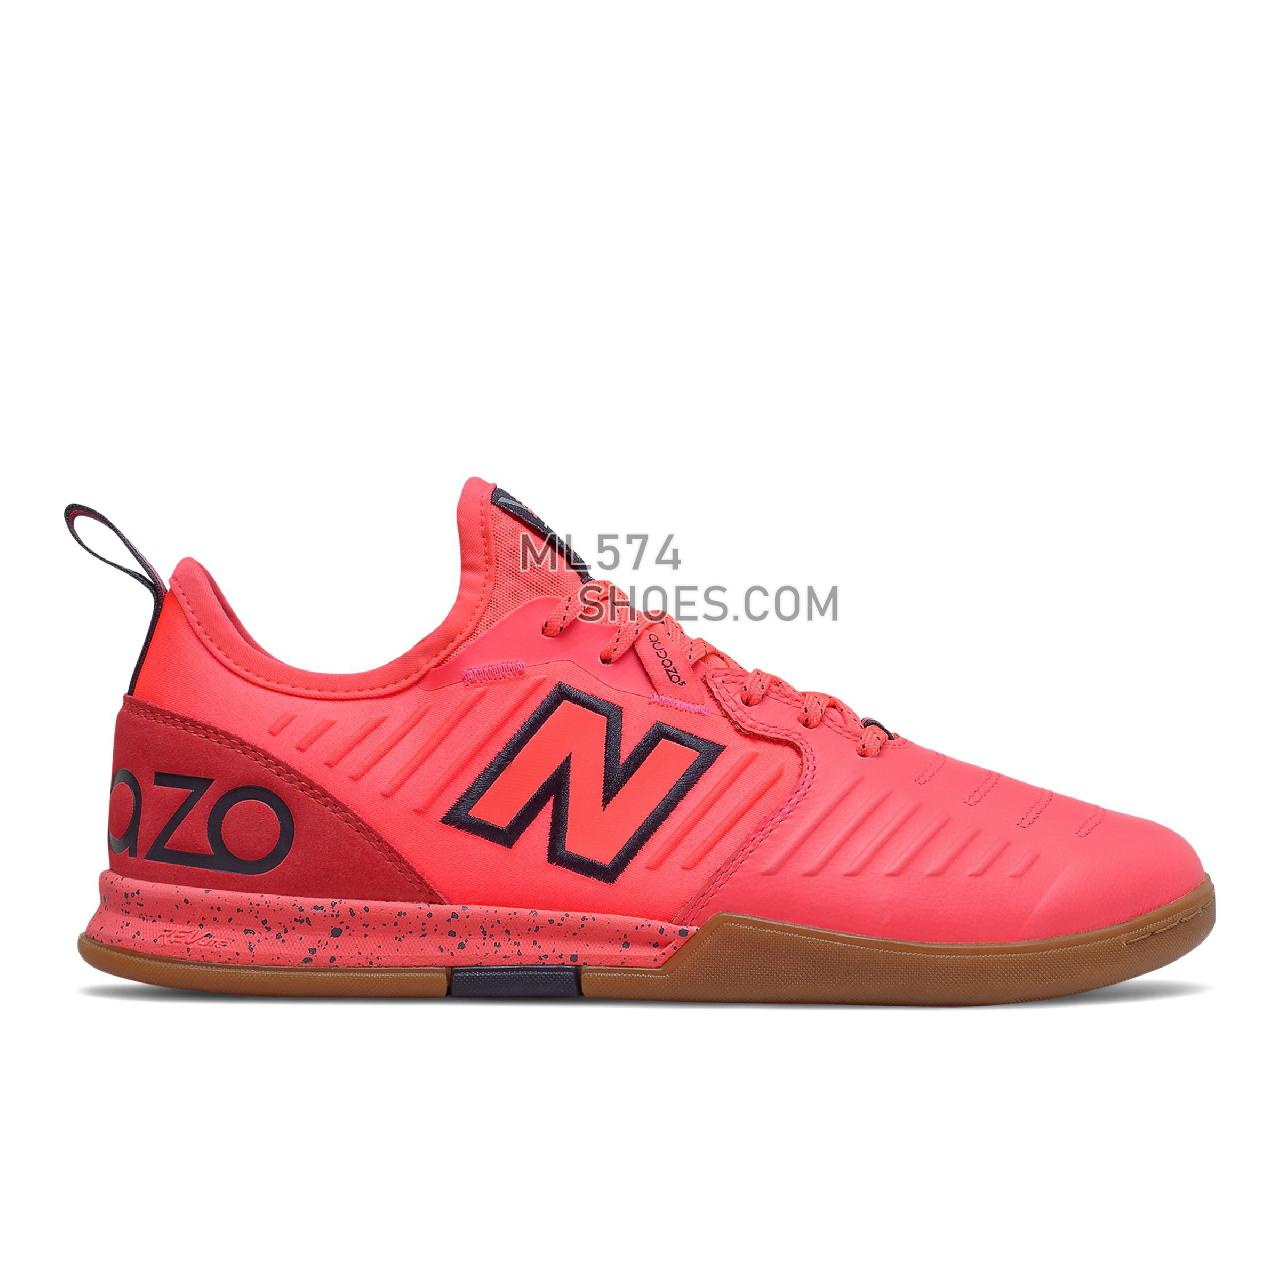 New Balance Audazo v5 Pro IN - Men's Classic Sneakers - Vivid Coral with Outerspace - MSA1IVC5